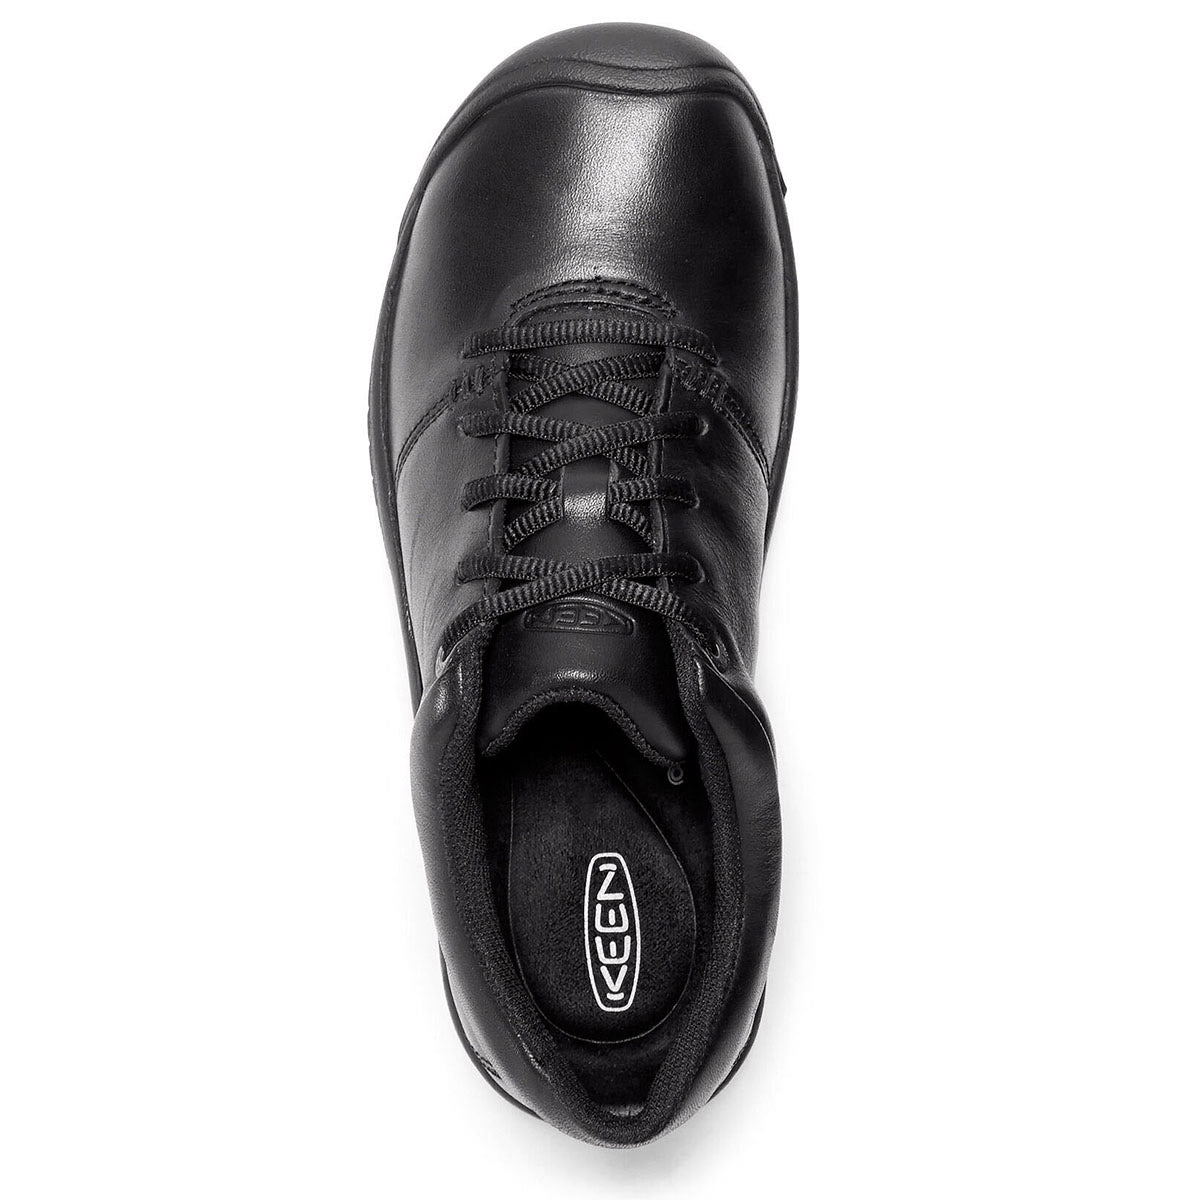 Keen PTC Oxford black lace-up work shoe viewed from above, featuring a non-slip sole.